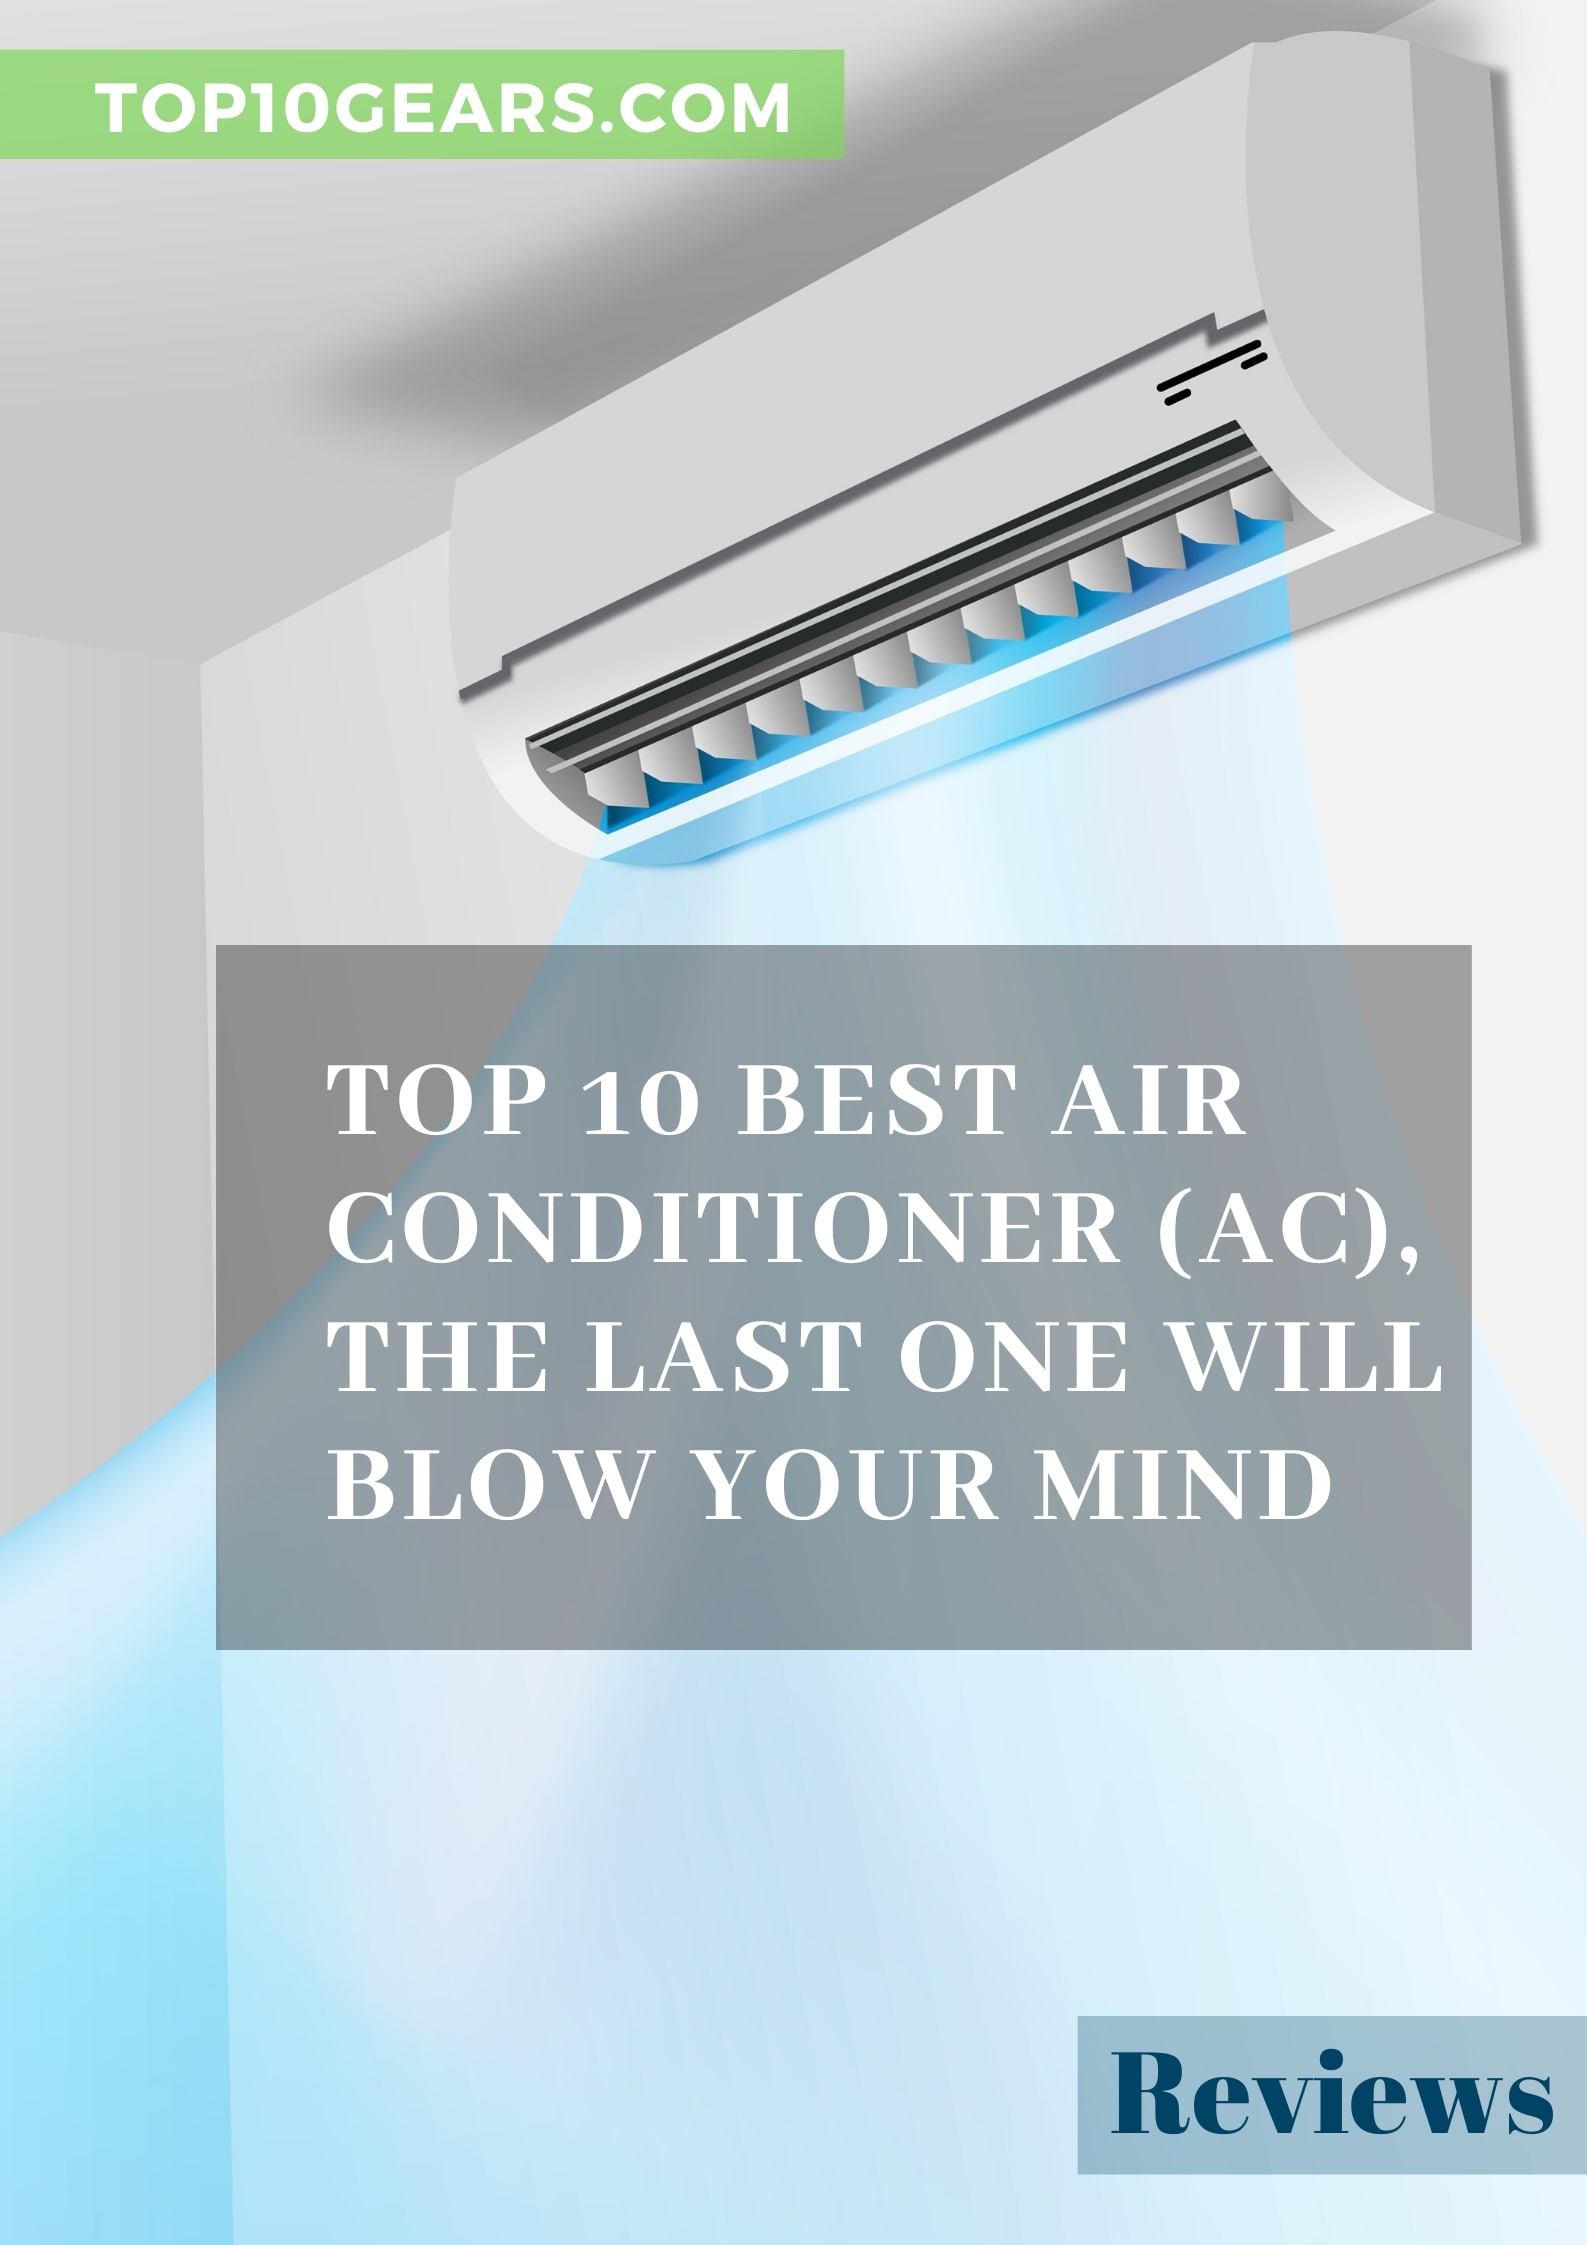 Top 10 Best Air Conditioners (AC) in India, the Last one will blow your